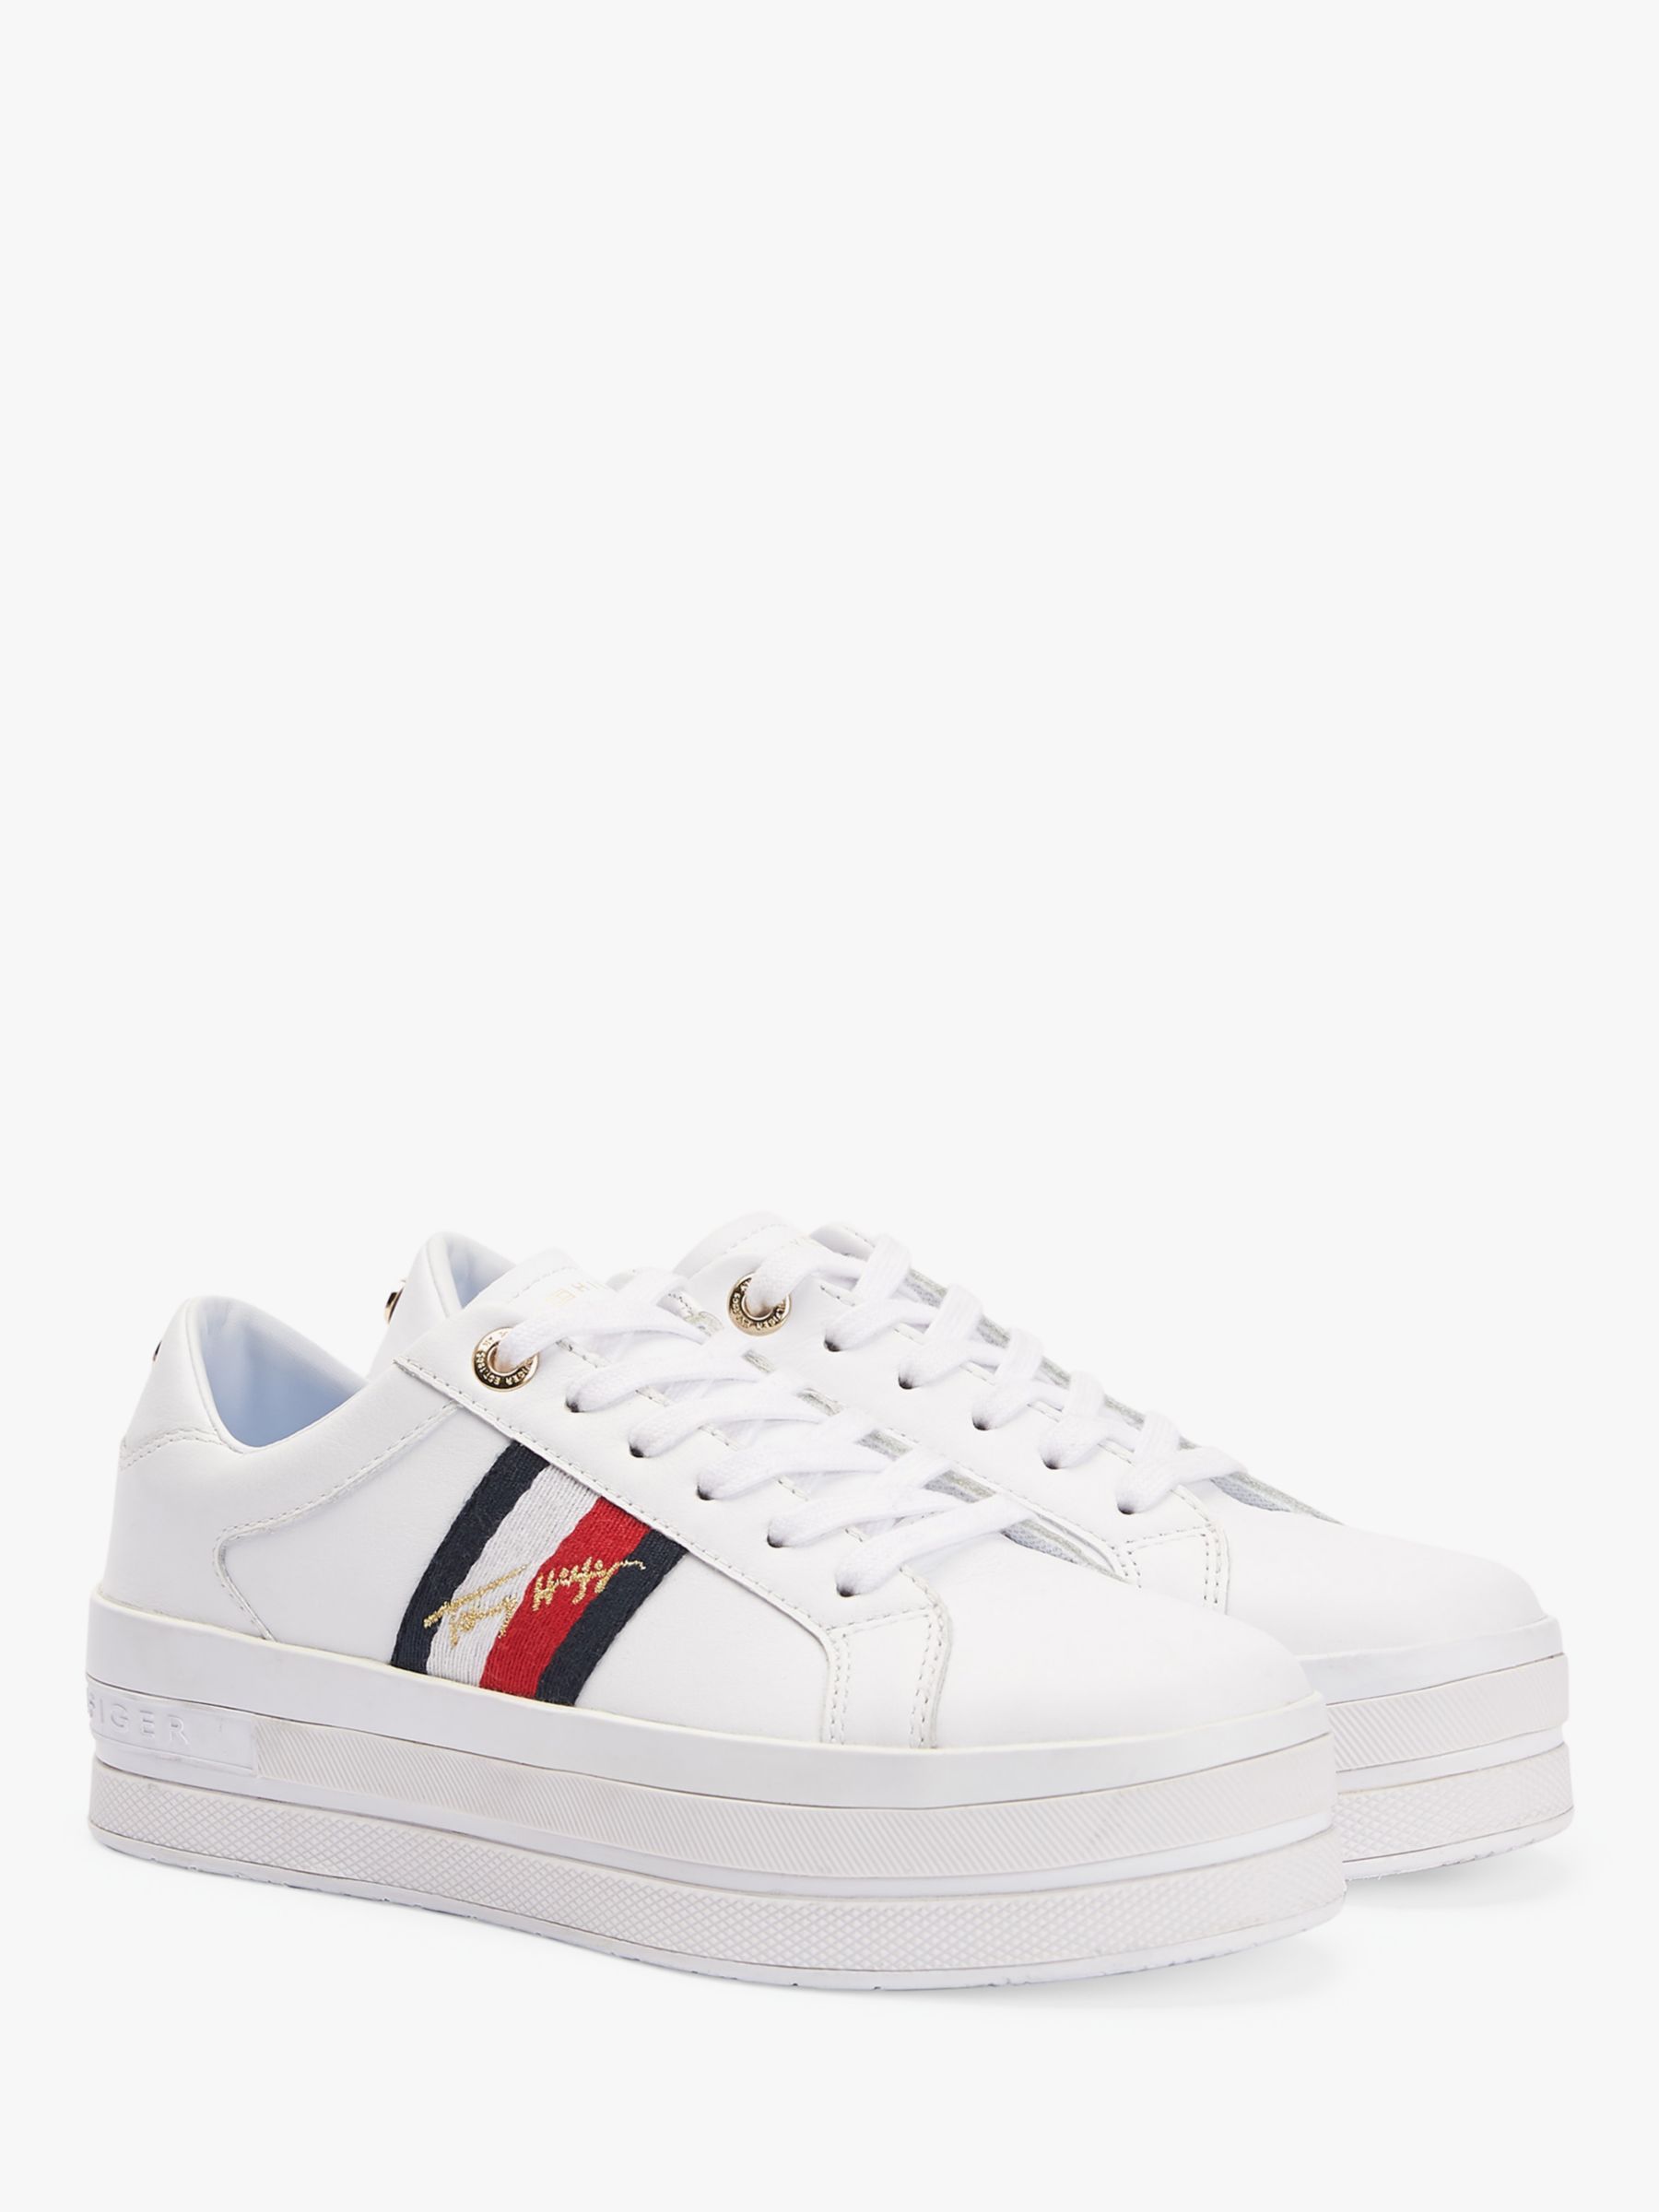 Tommy Hilfiger Signature Flatform Leather Trainers, White at John Lewis ...